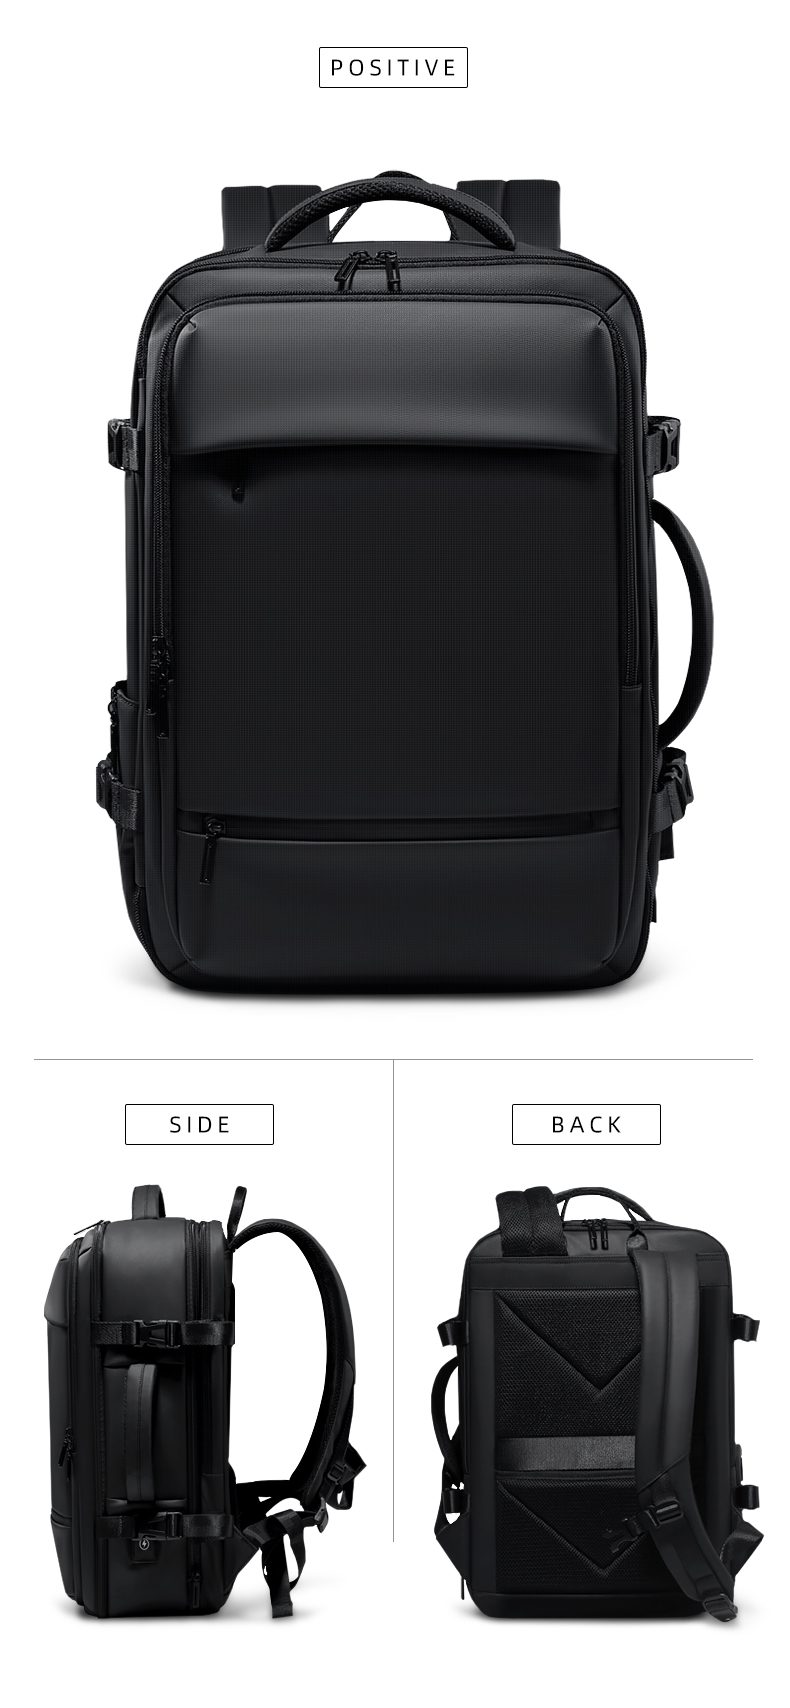 Fenruien Black Oxford Waterproof Backpacks for Men with USB Charging Port 17.3 Inch